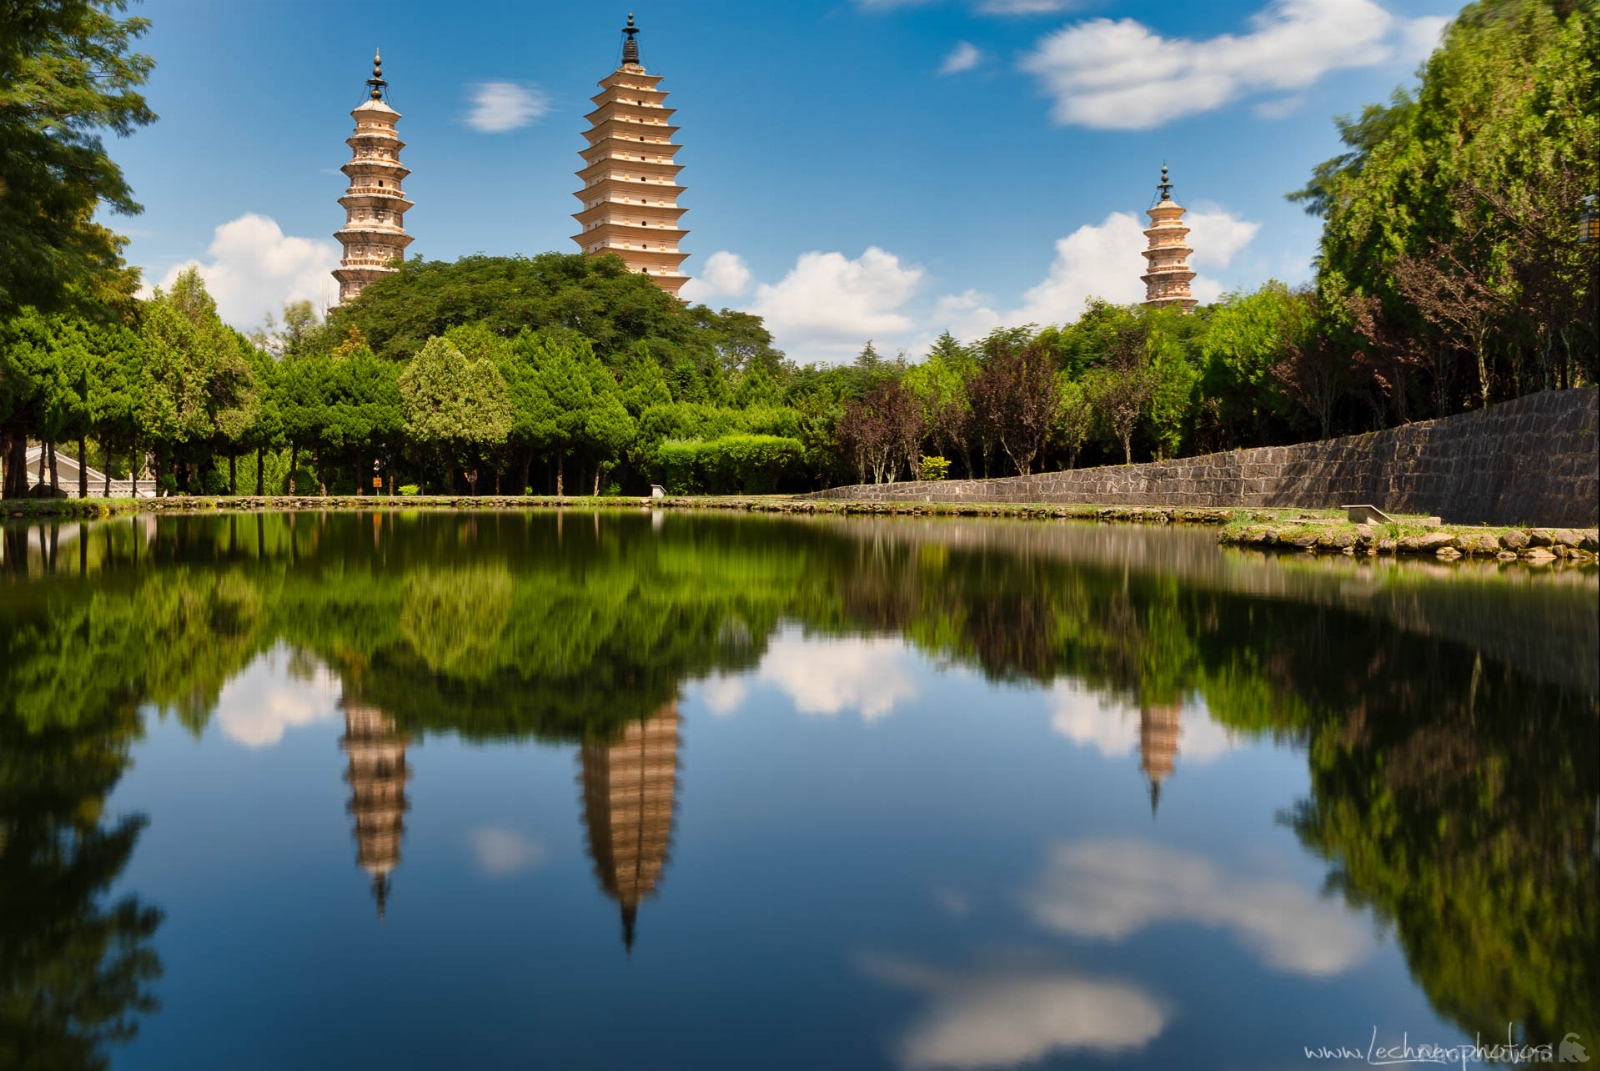 Image of Three Pagodas in Dali by Florian Lechner